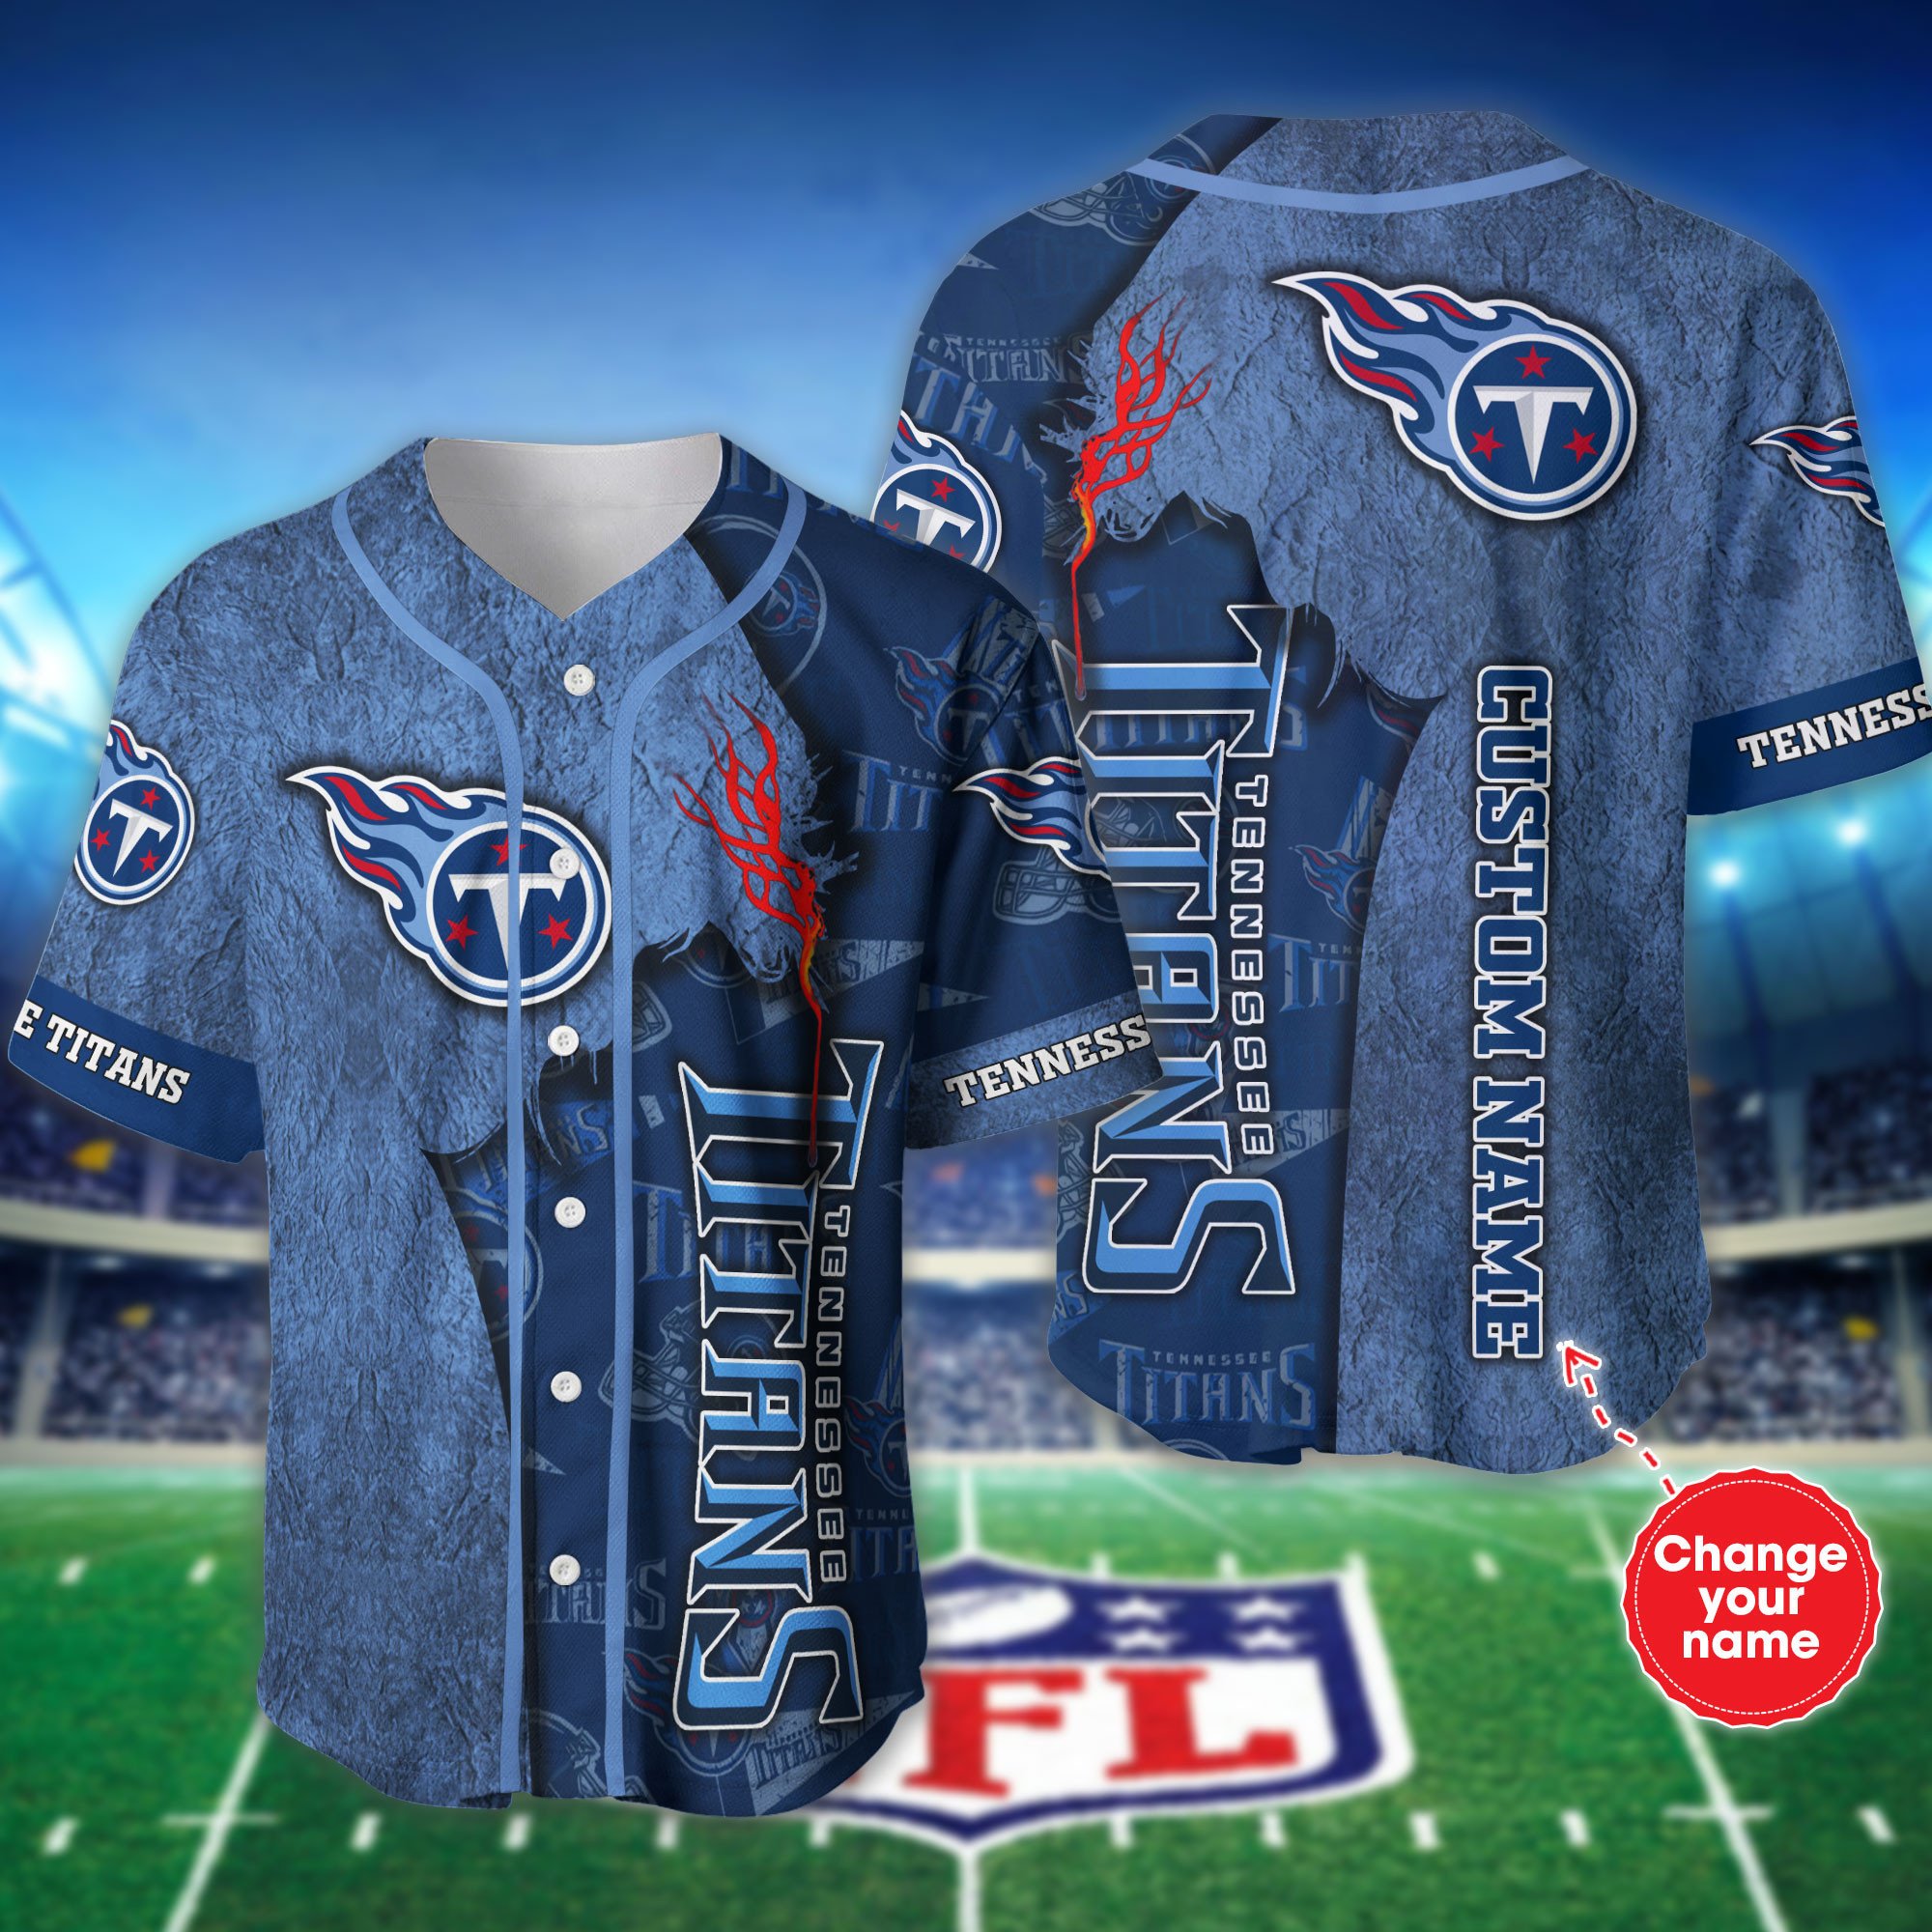 Buy Tennessee Titans NFL 3D Personalized Baseball Jersey TMPHBB1300631